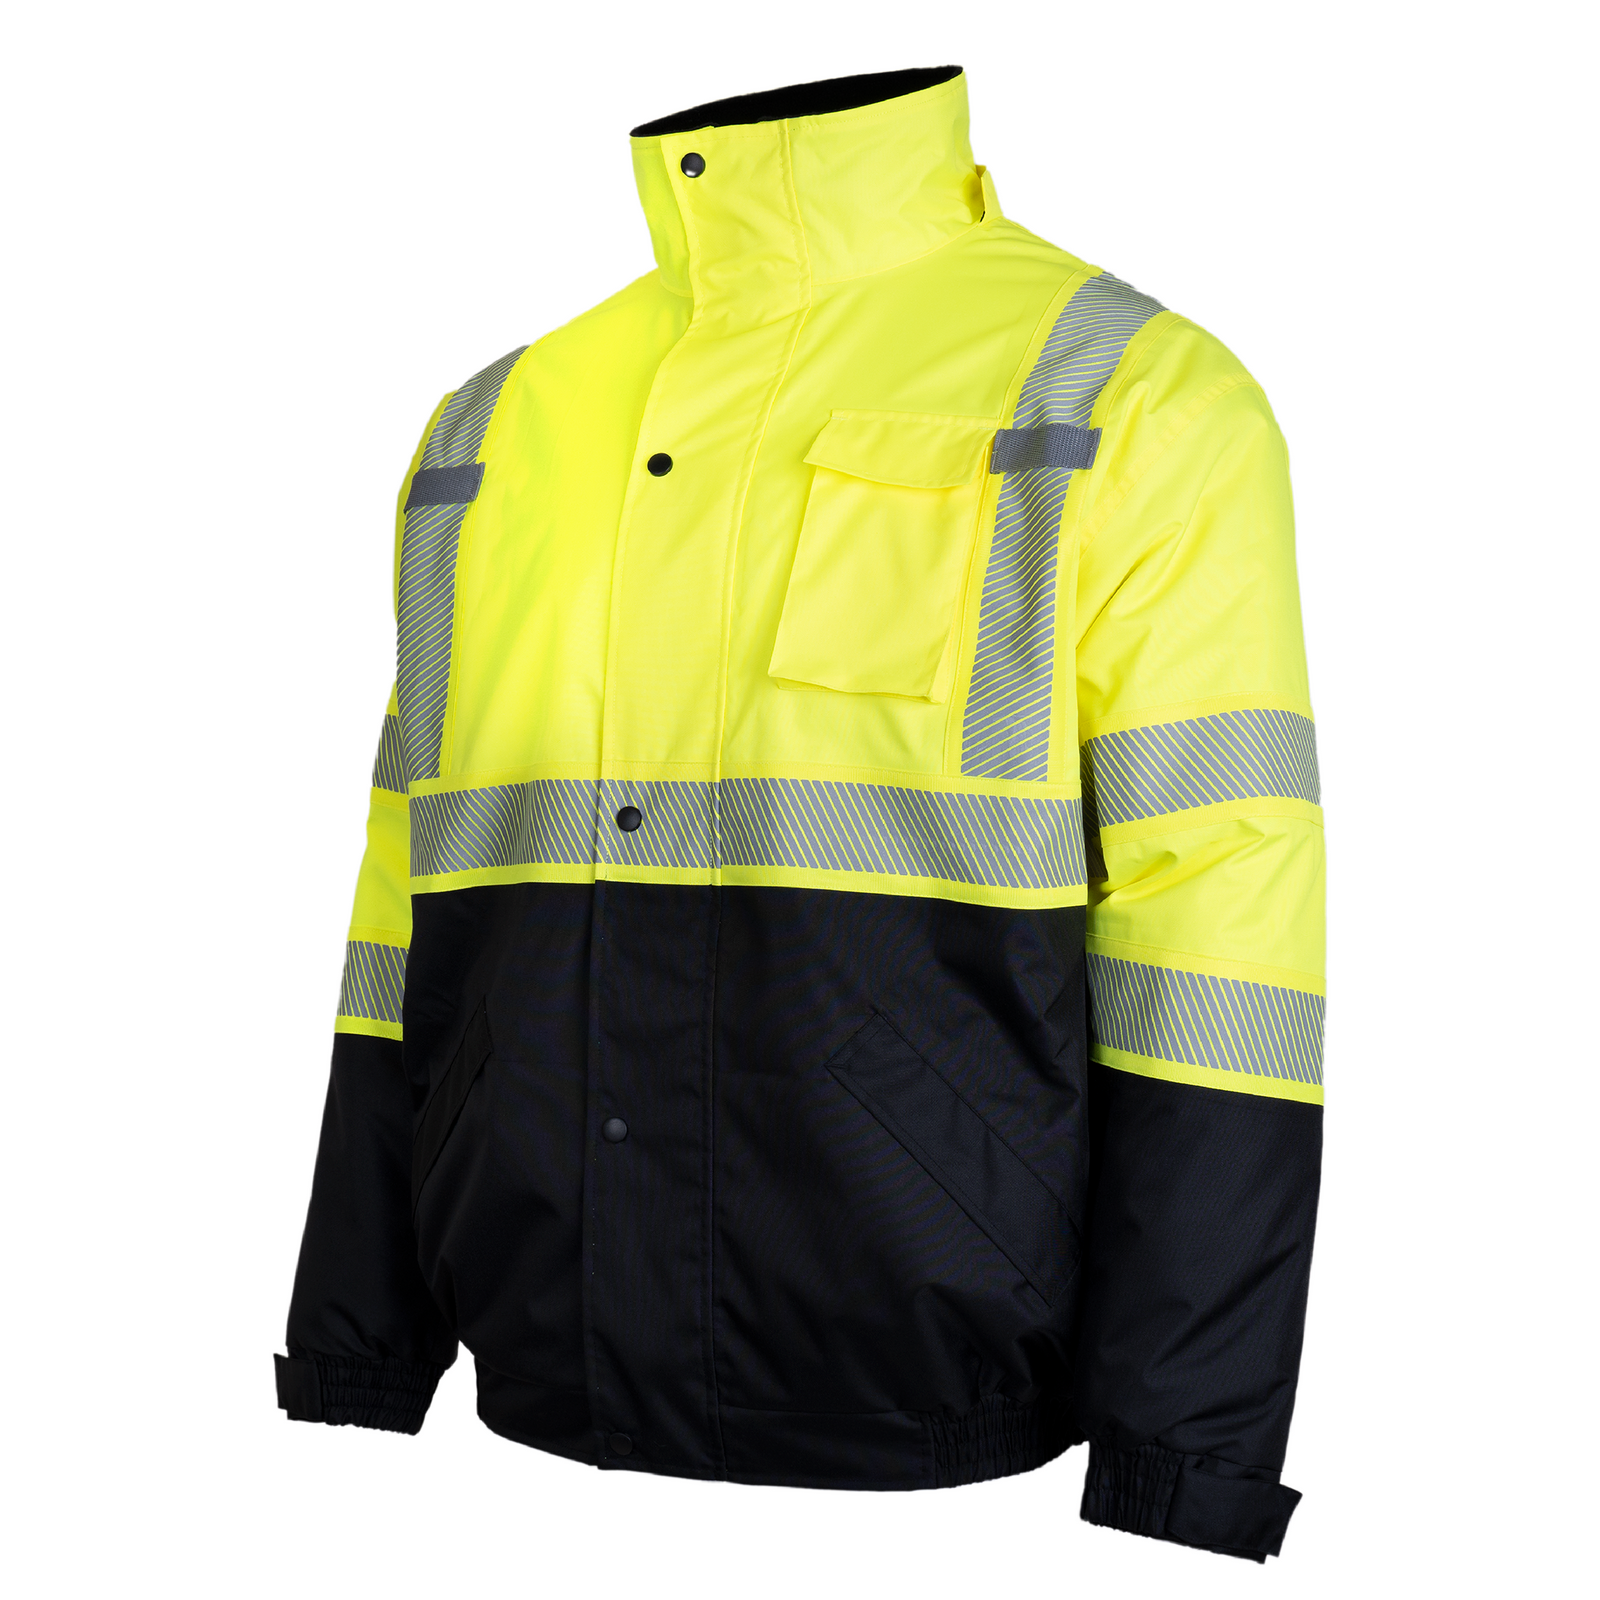 Yellow and black Hi-vis safety jacket with heat transfer reflective tapes and removable hoodie